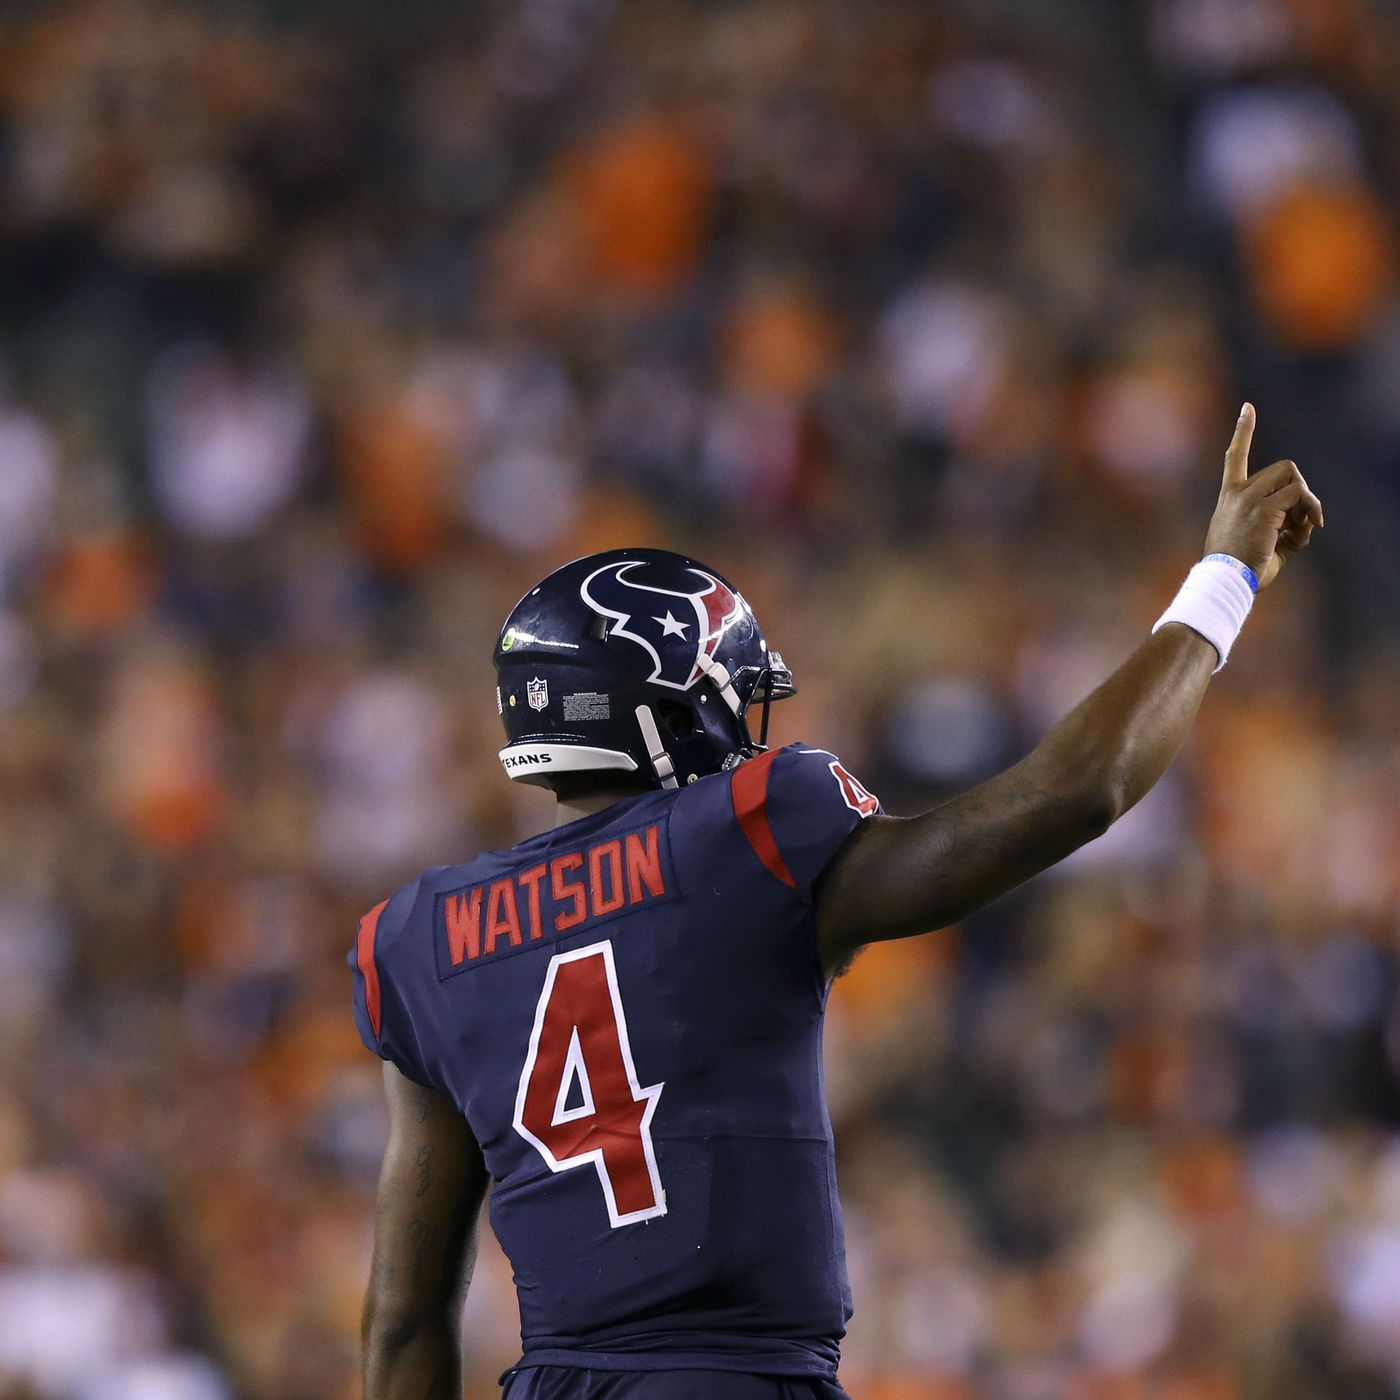 Deshaun Watson gives the Texans hope after winning his 1st NFL